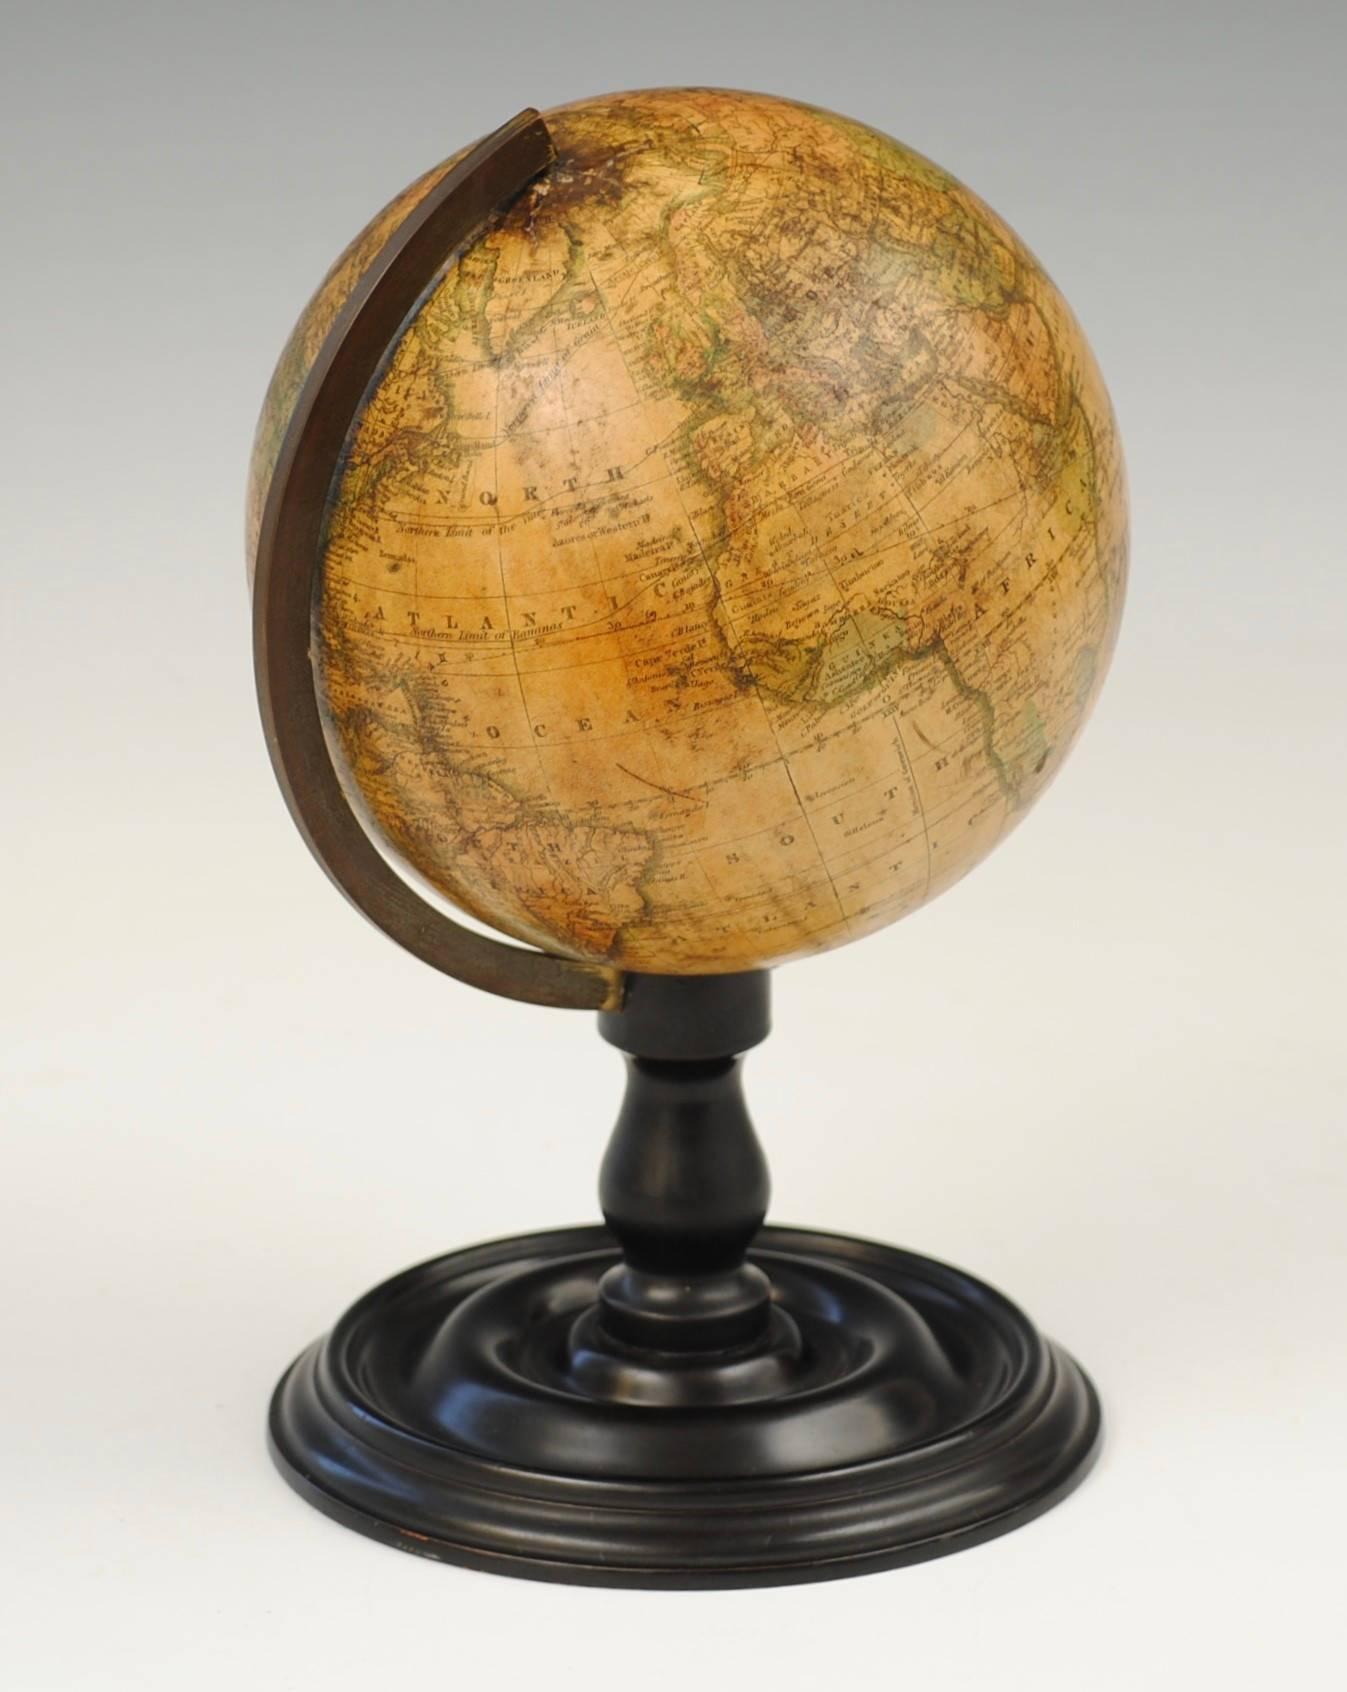 A good example of a 19th century terrestrial globe by Joslins, Boston on a turned and ebonized stand.